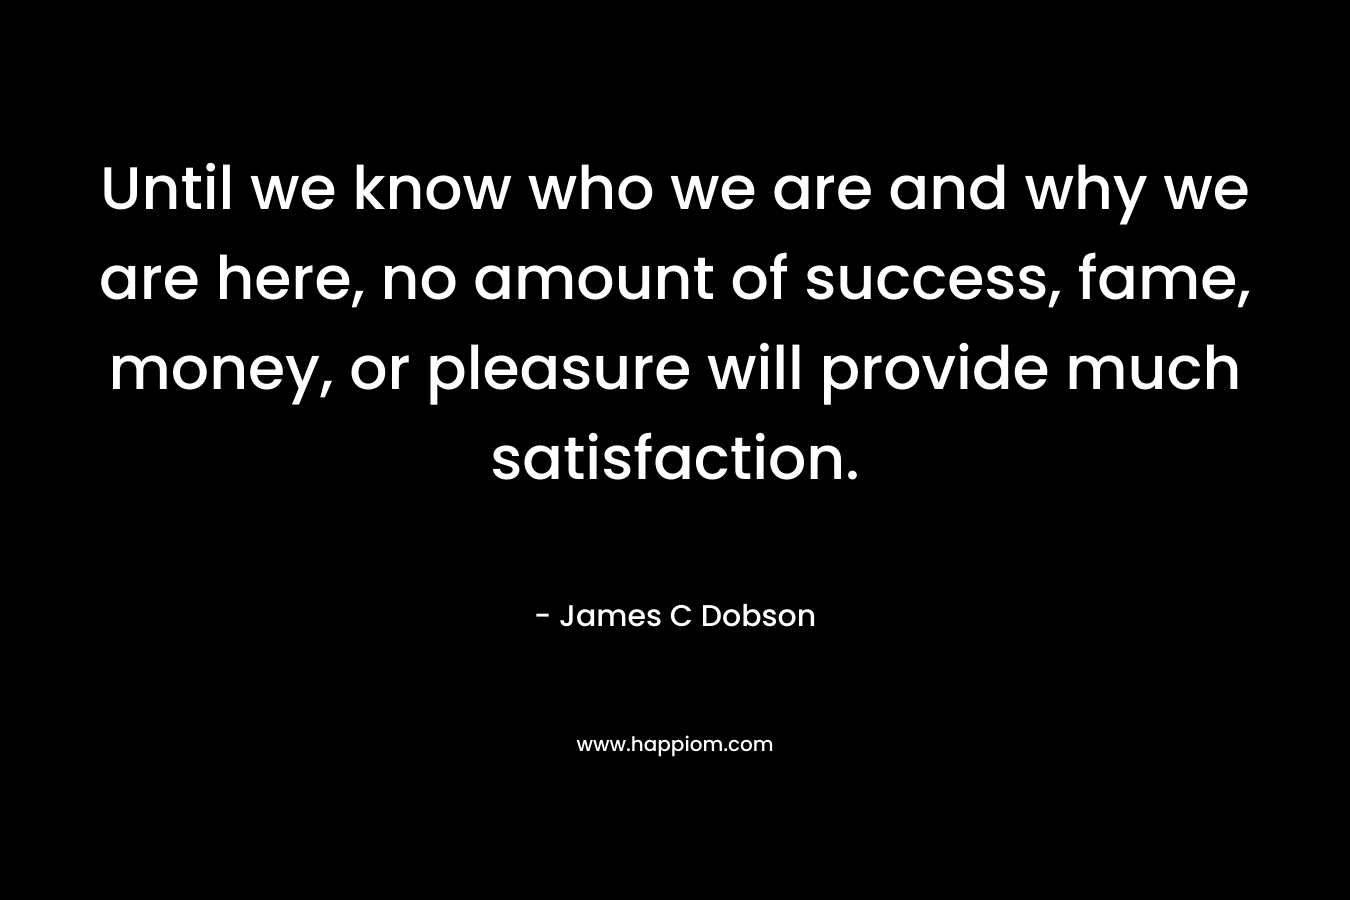 Until we know who we are and why we are here, no amount of success, fame, money, or pleasure will provide much satisfaction.